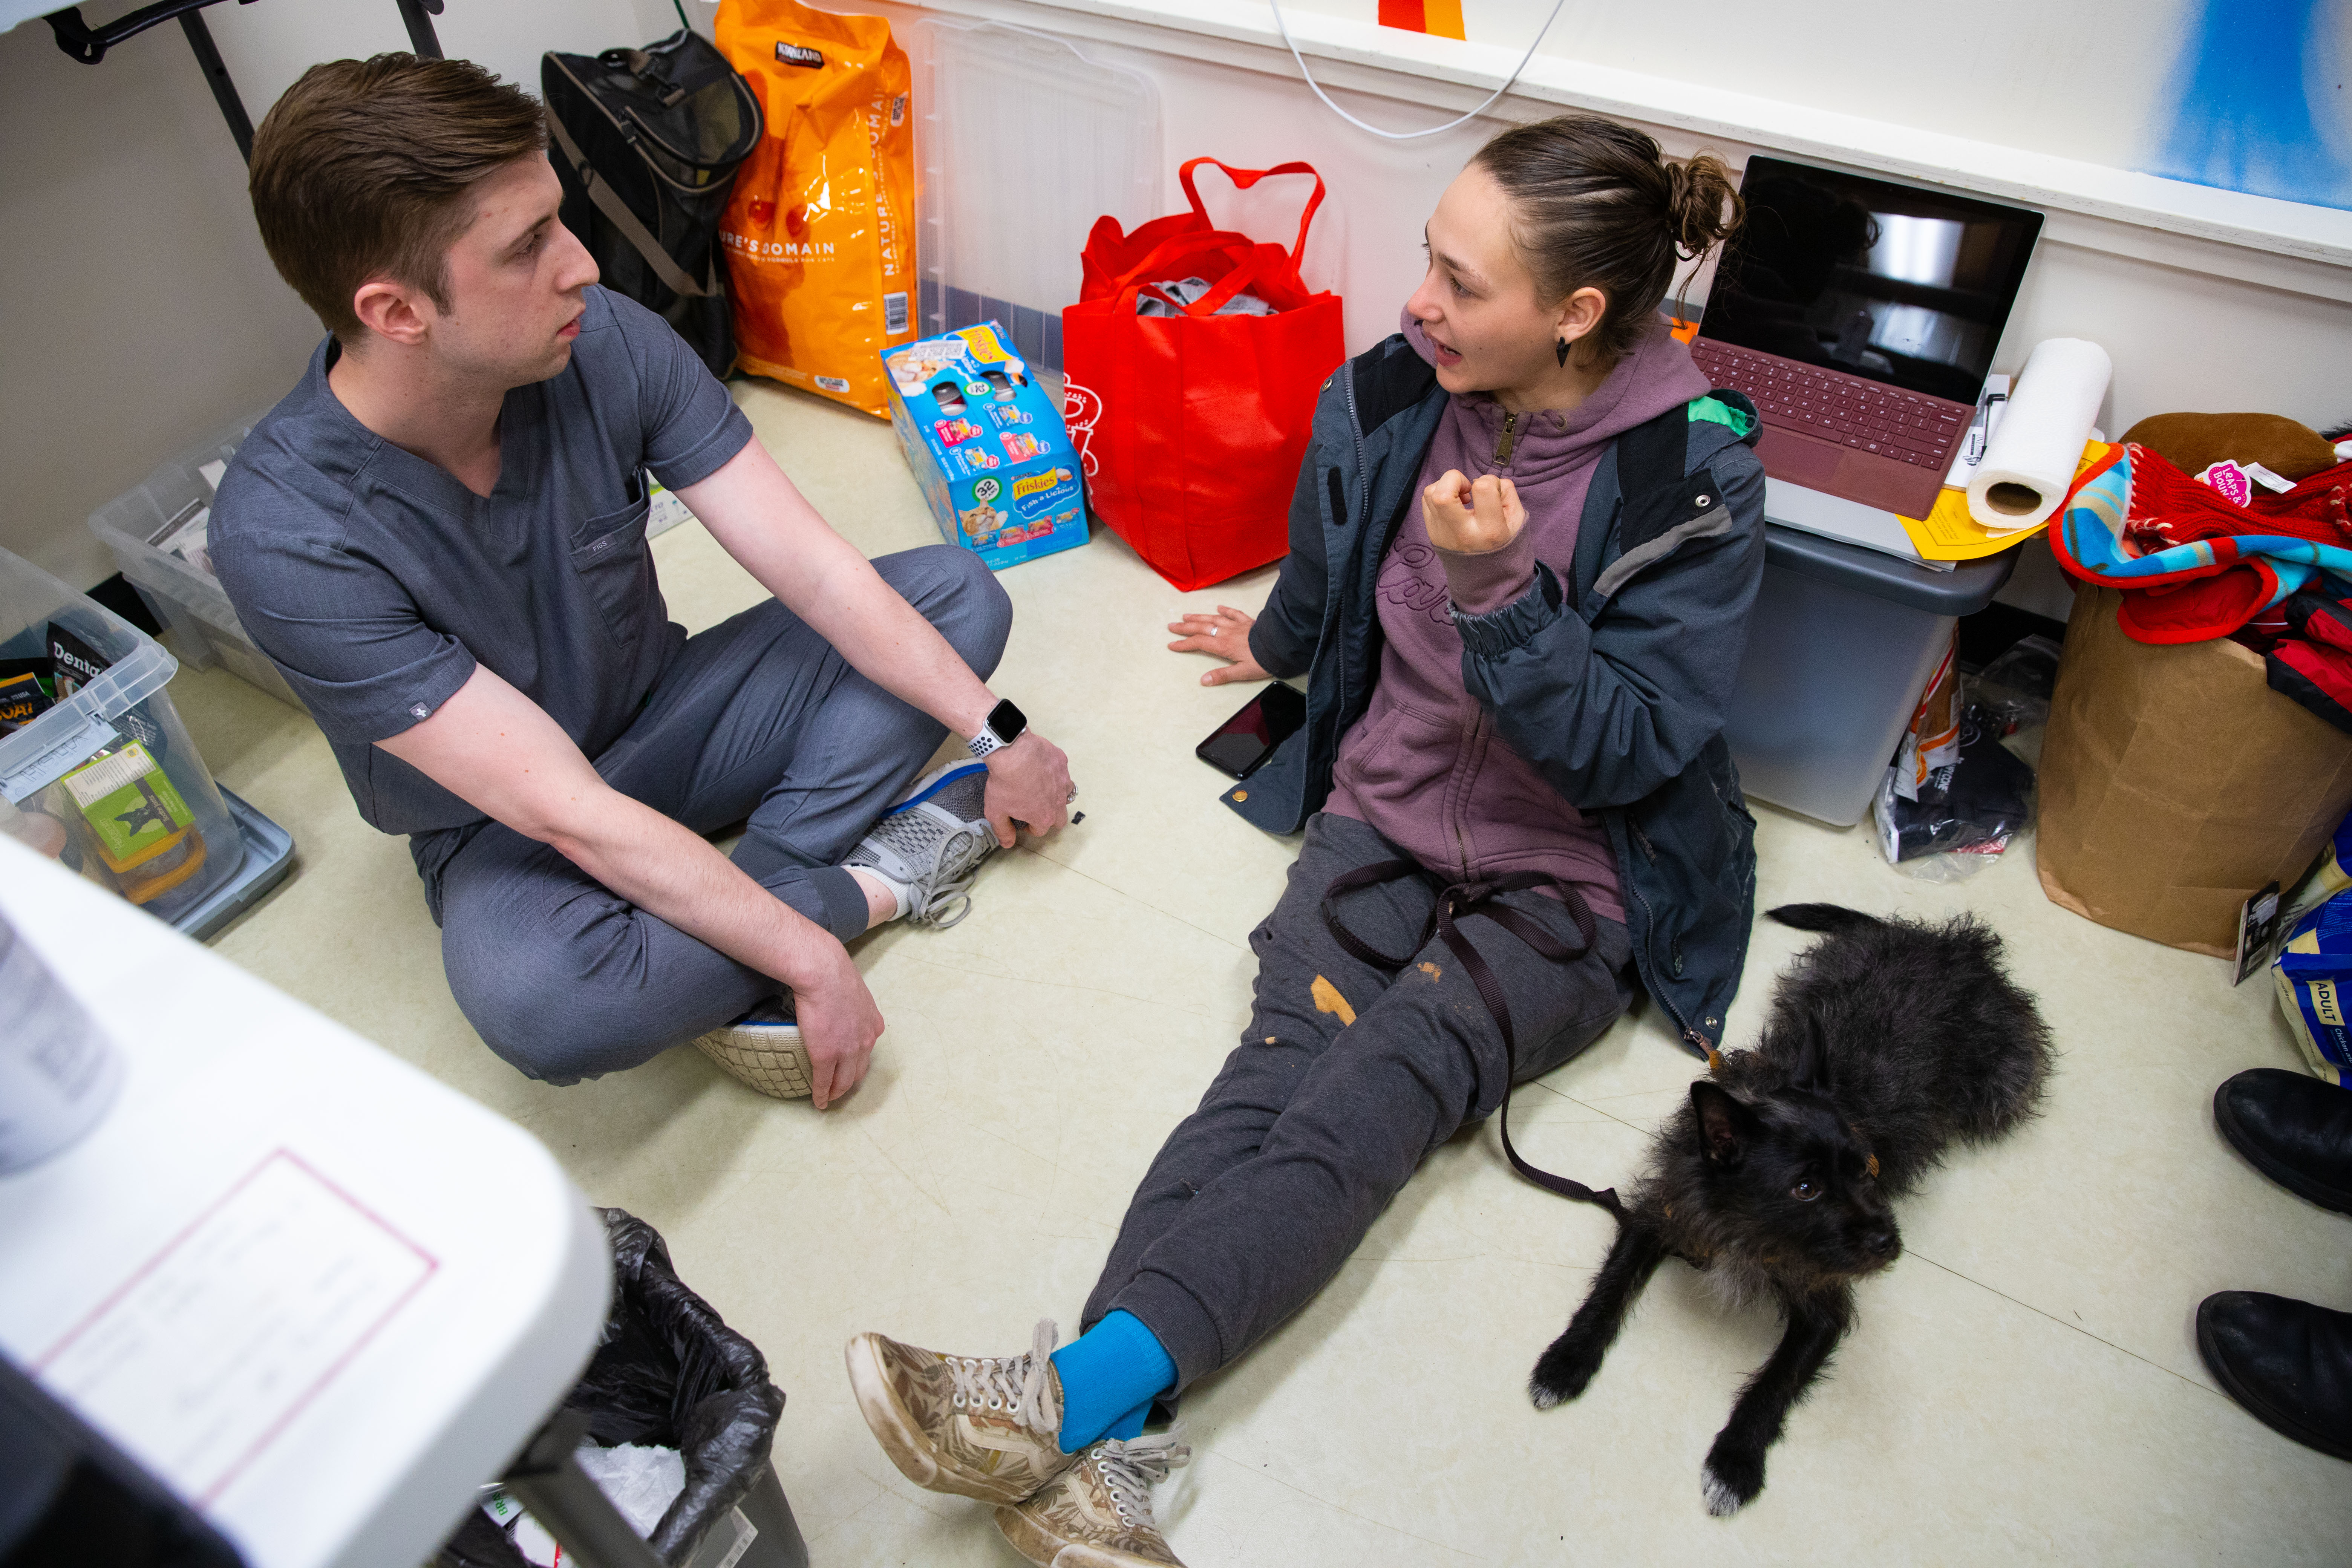 Alice Tin, MD, Katie Kuehl, DVM, and a veterinary student confer over a client pair. Photo credit: Gemina Garland-Lewis